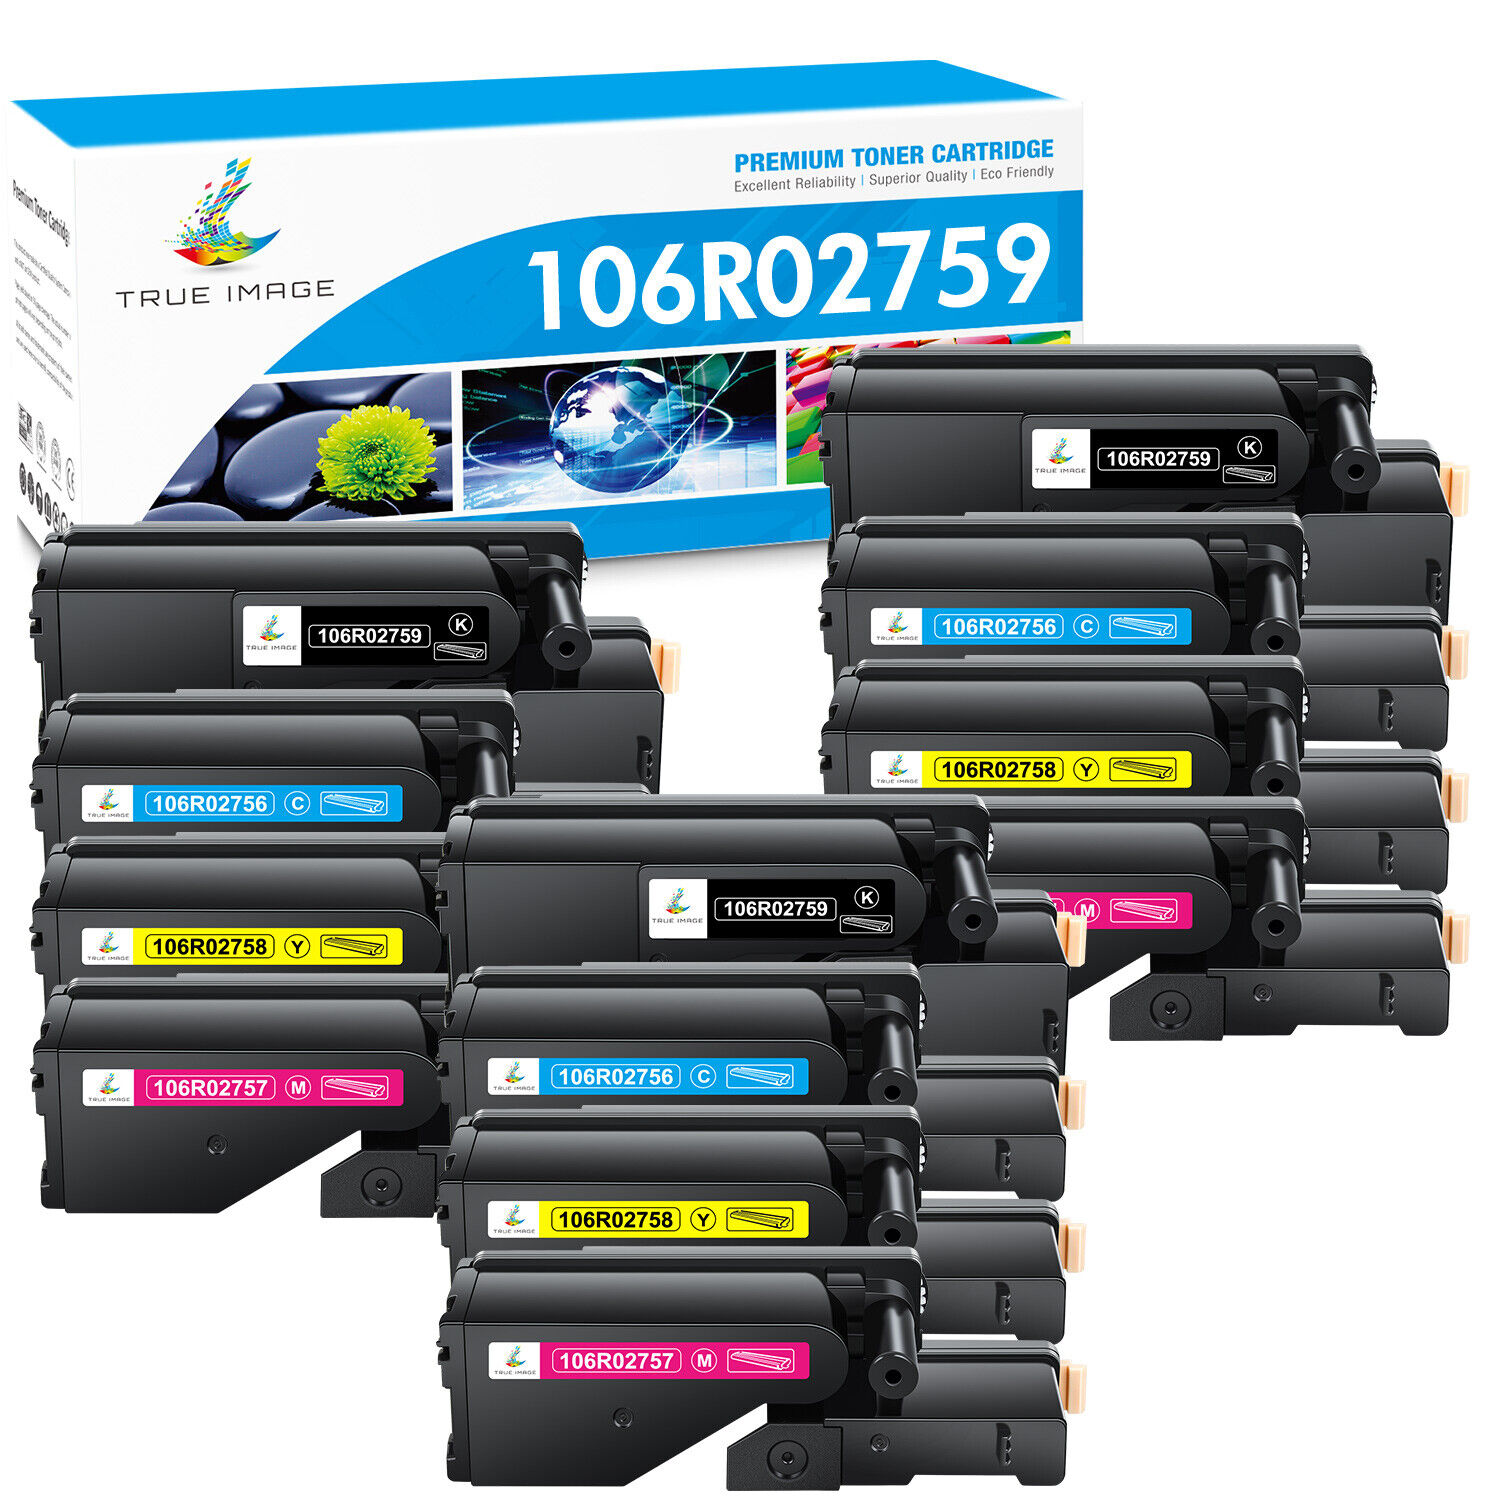 12 PK Toner Compatible for Xerox WorkCentre 6025 6027 Phaser 6020 6022 106R02759